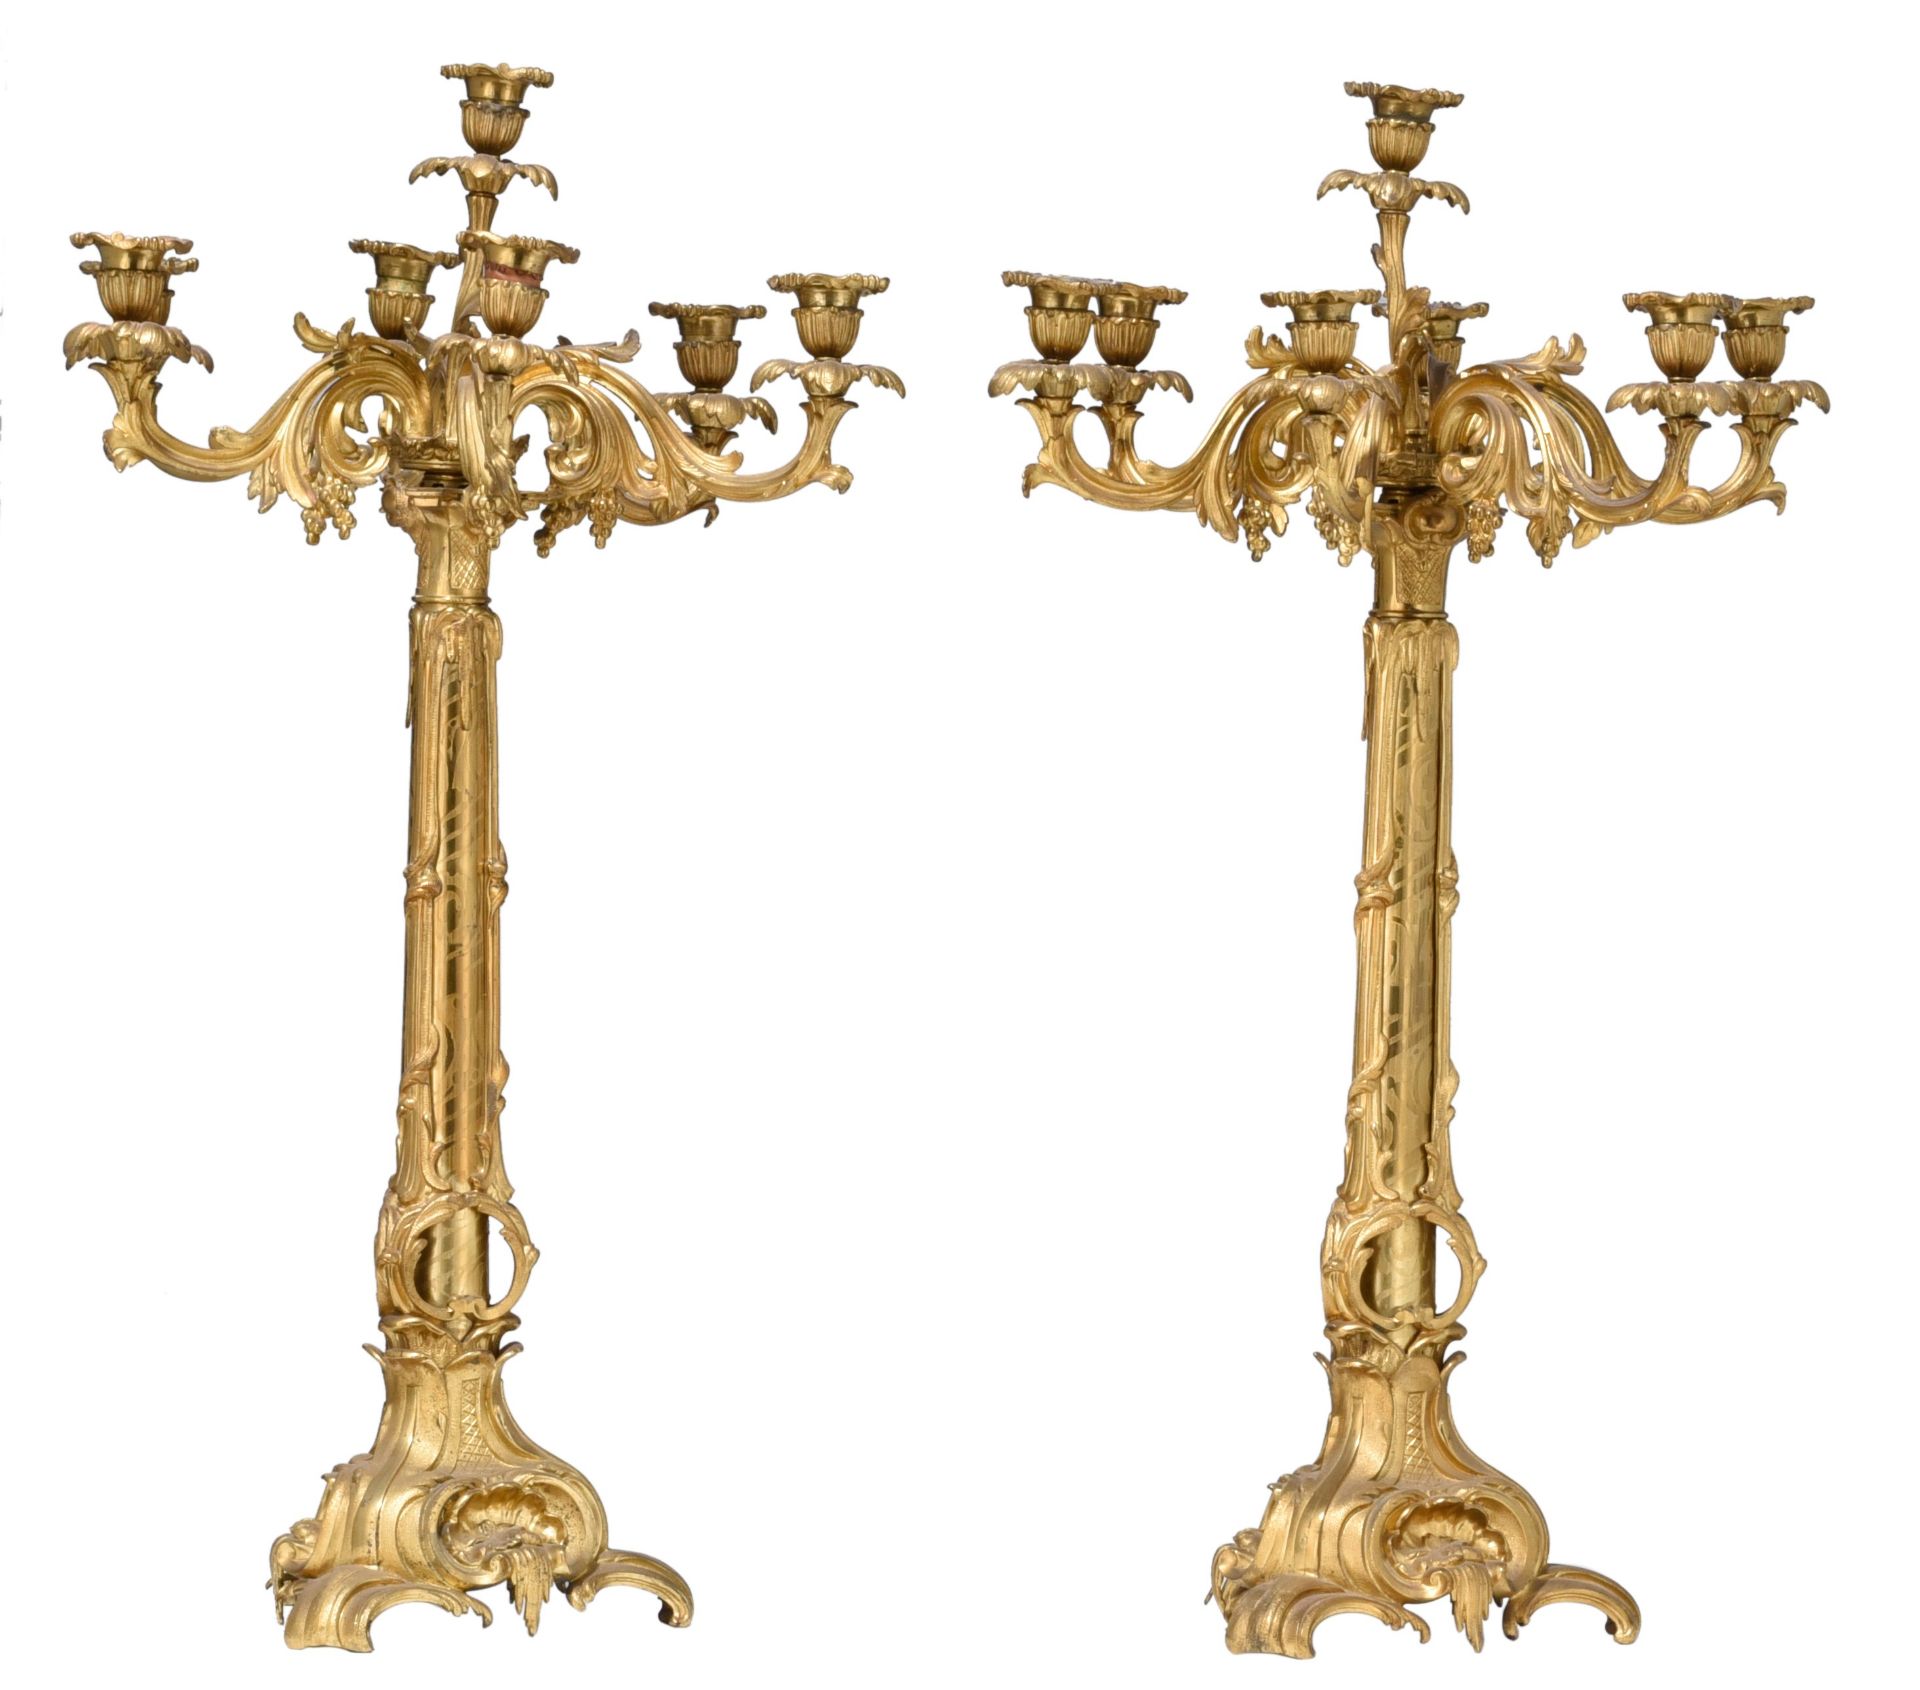 A large pair of Napoleon III gilt bronze candelabras and a matching coupe, H 74 - W 59 cm - Image 9 of 13